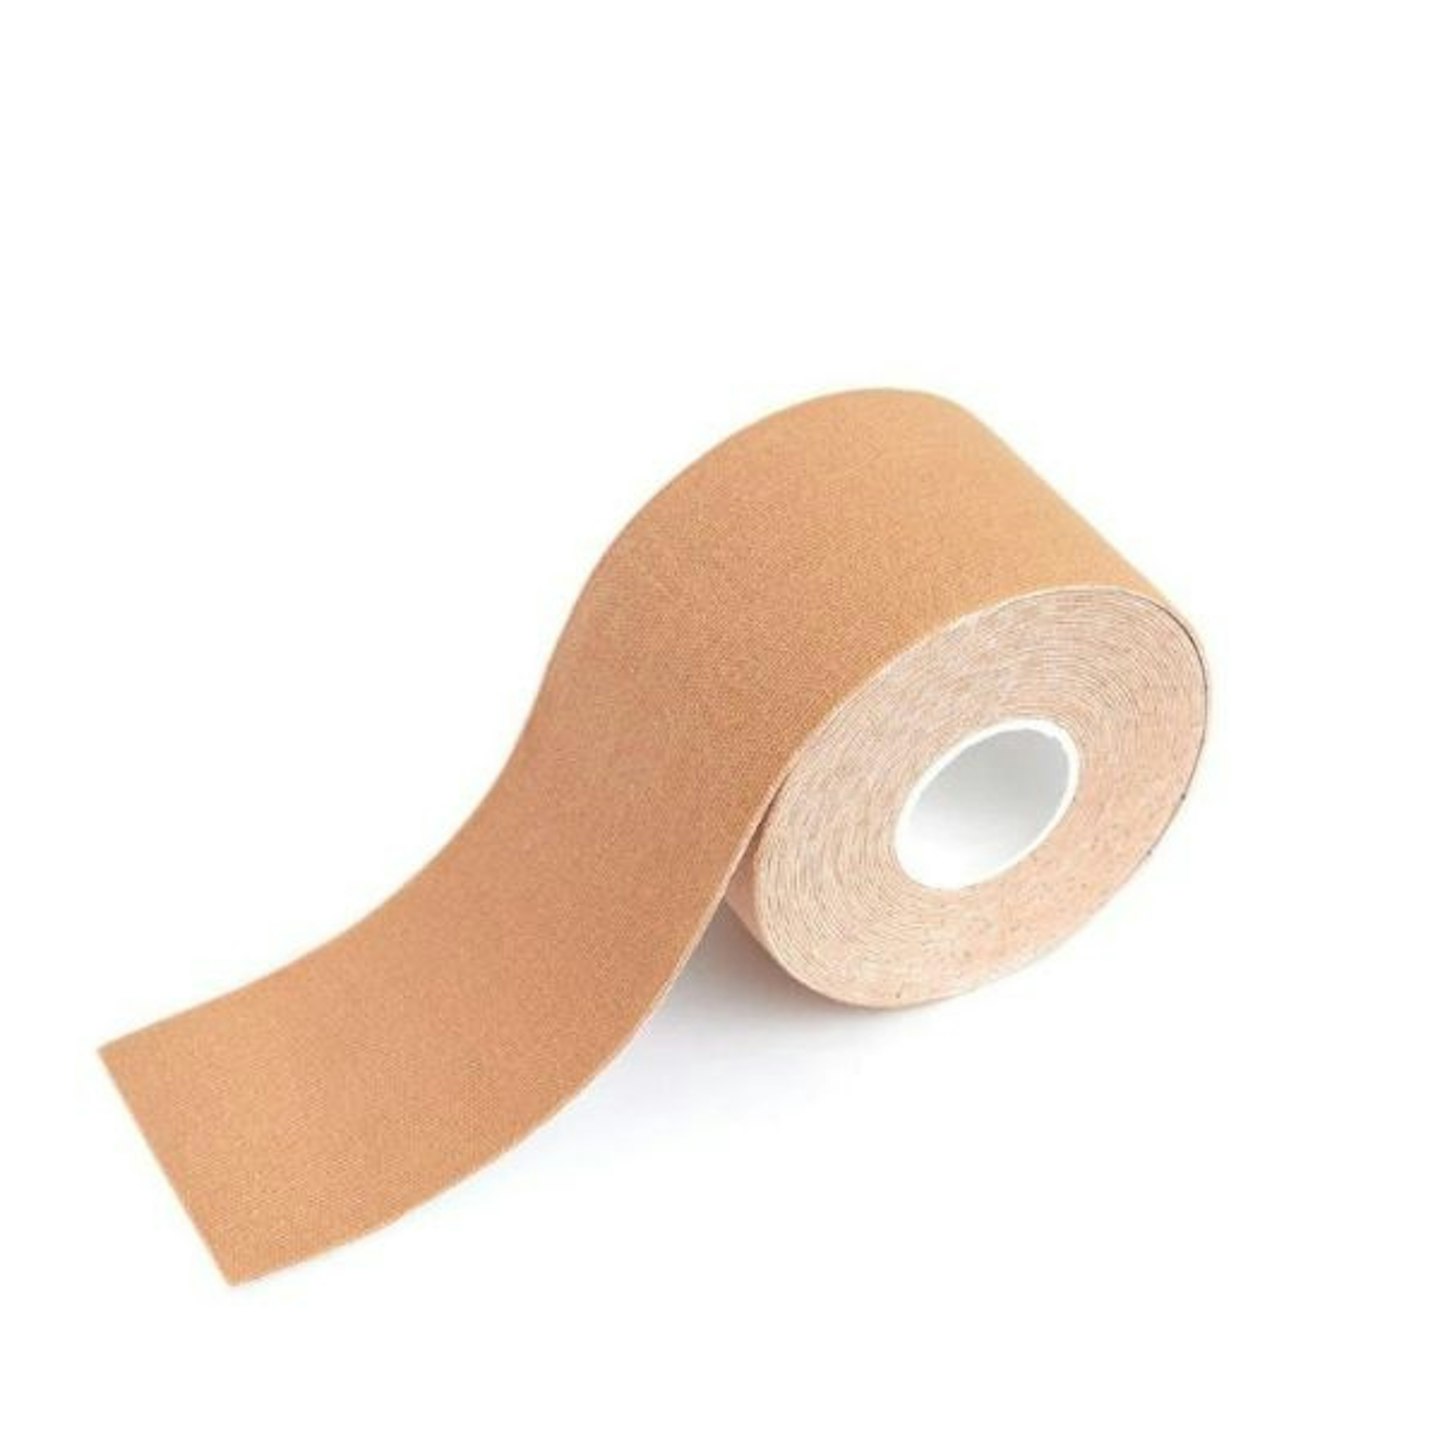 Eylure Body Tape Roll - Boots